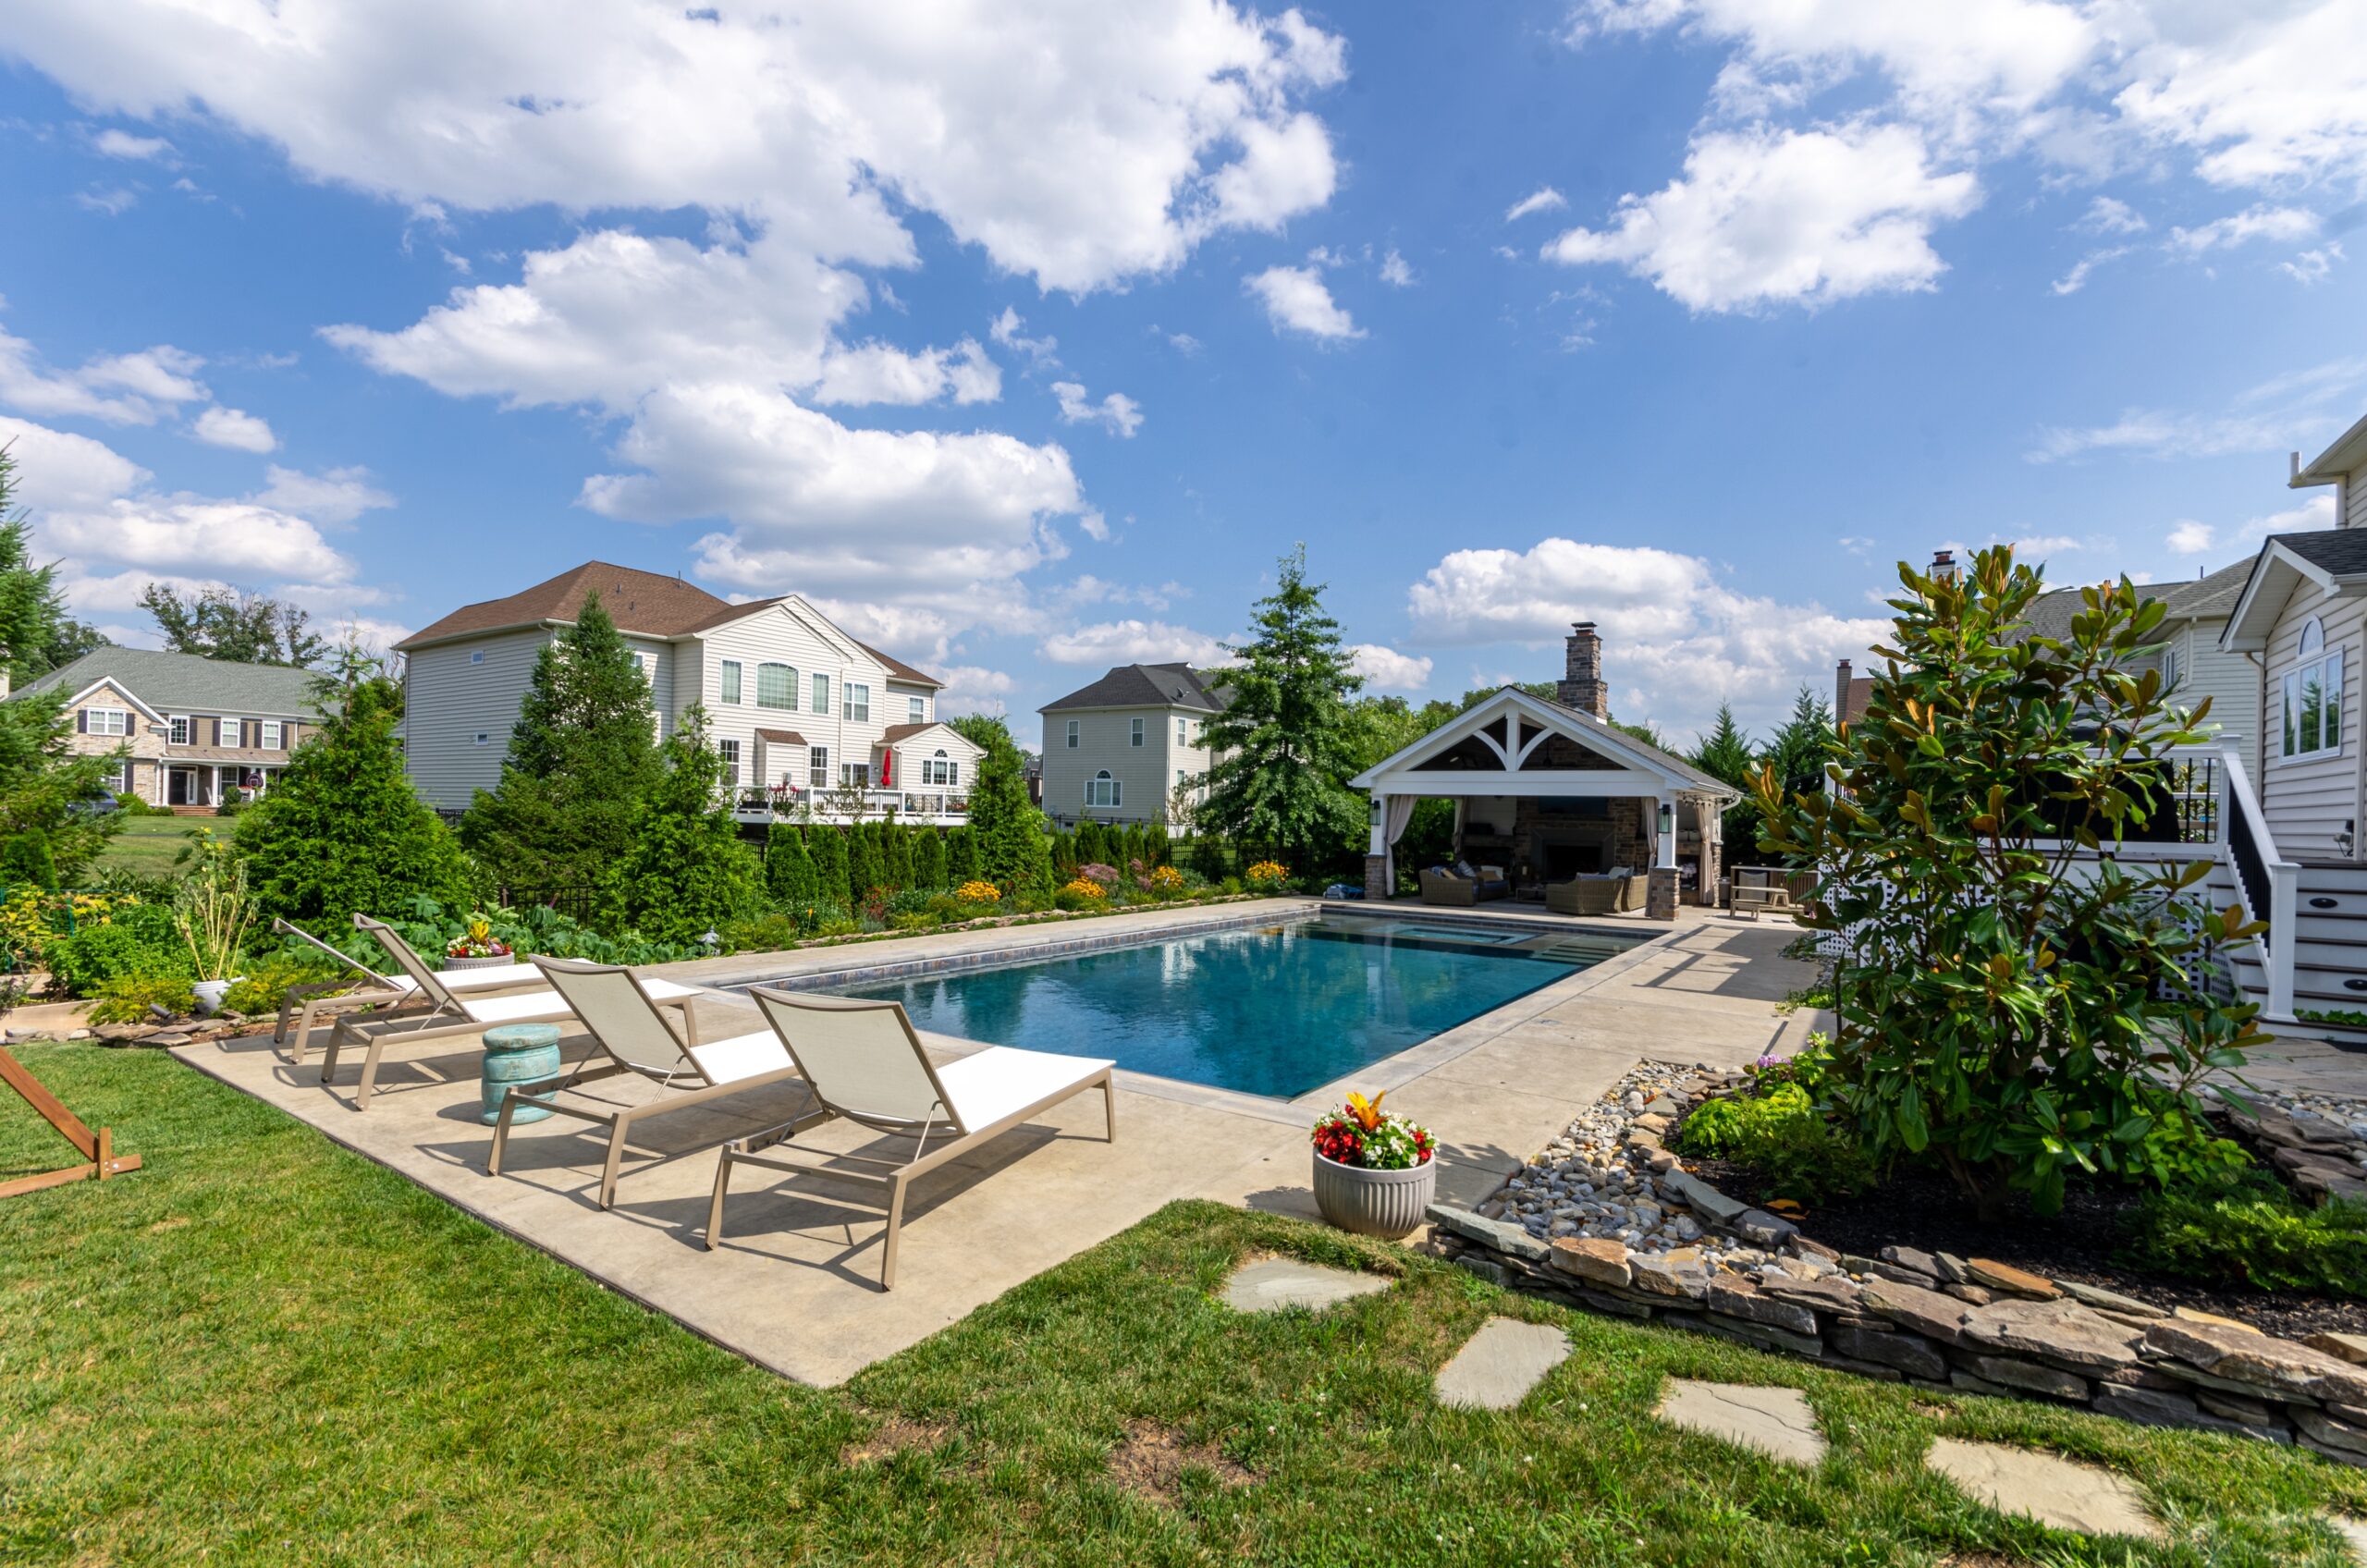 FOD Pool & Outdoor Living